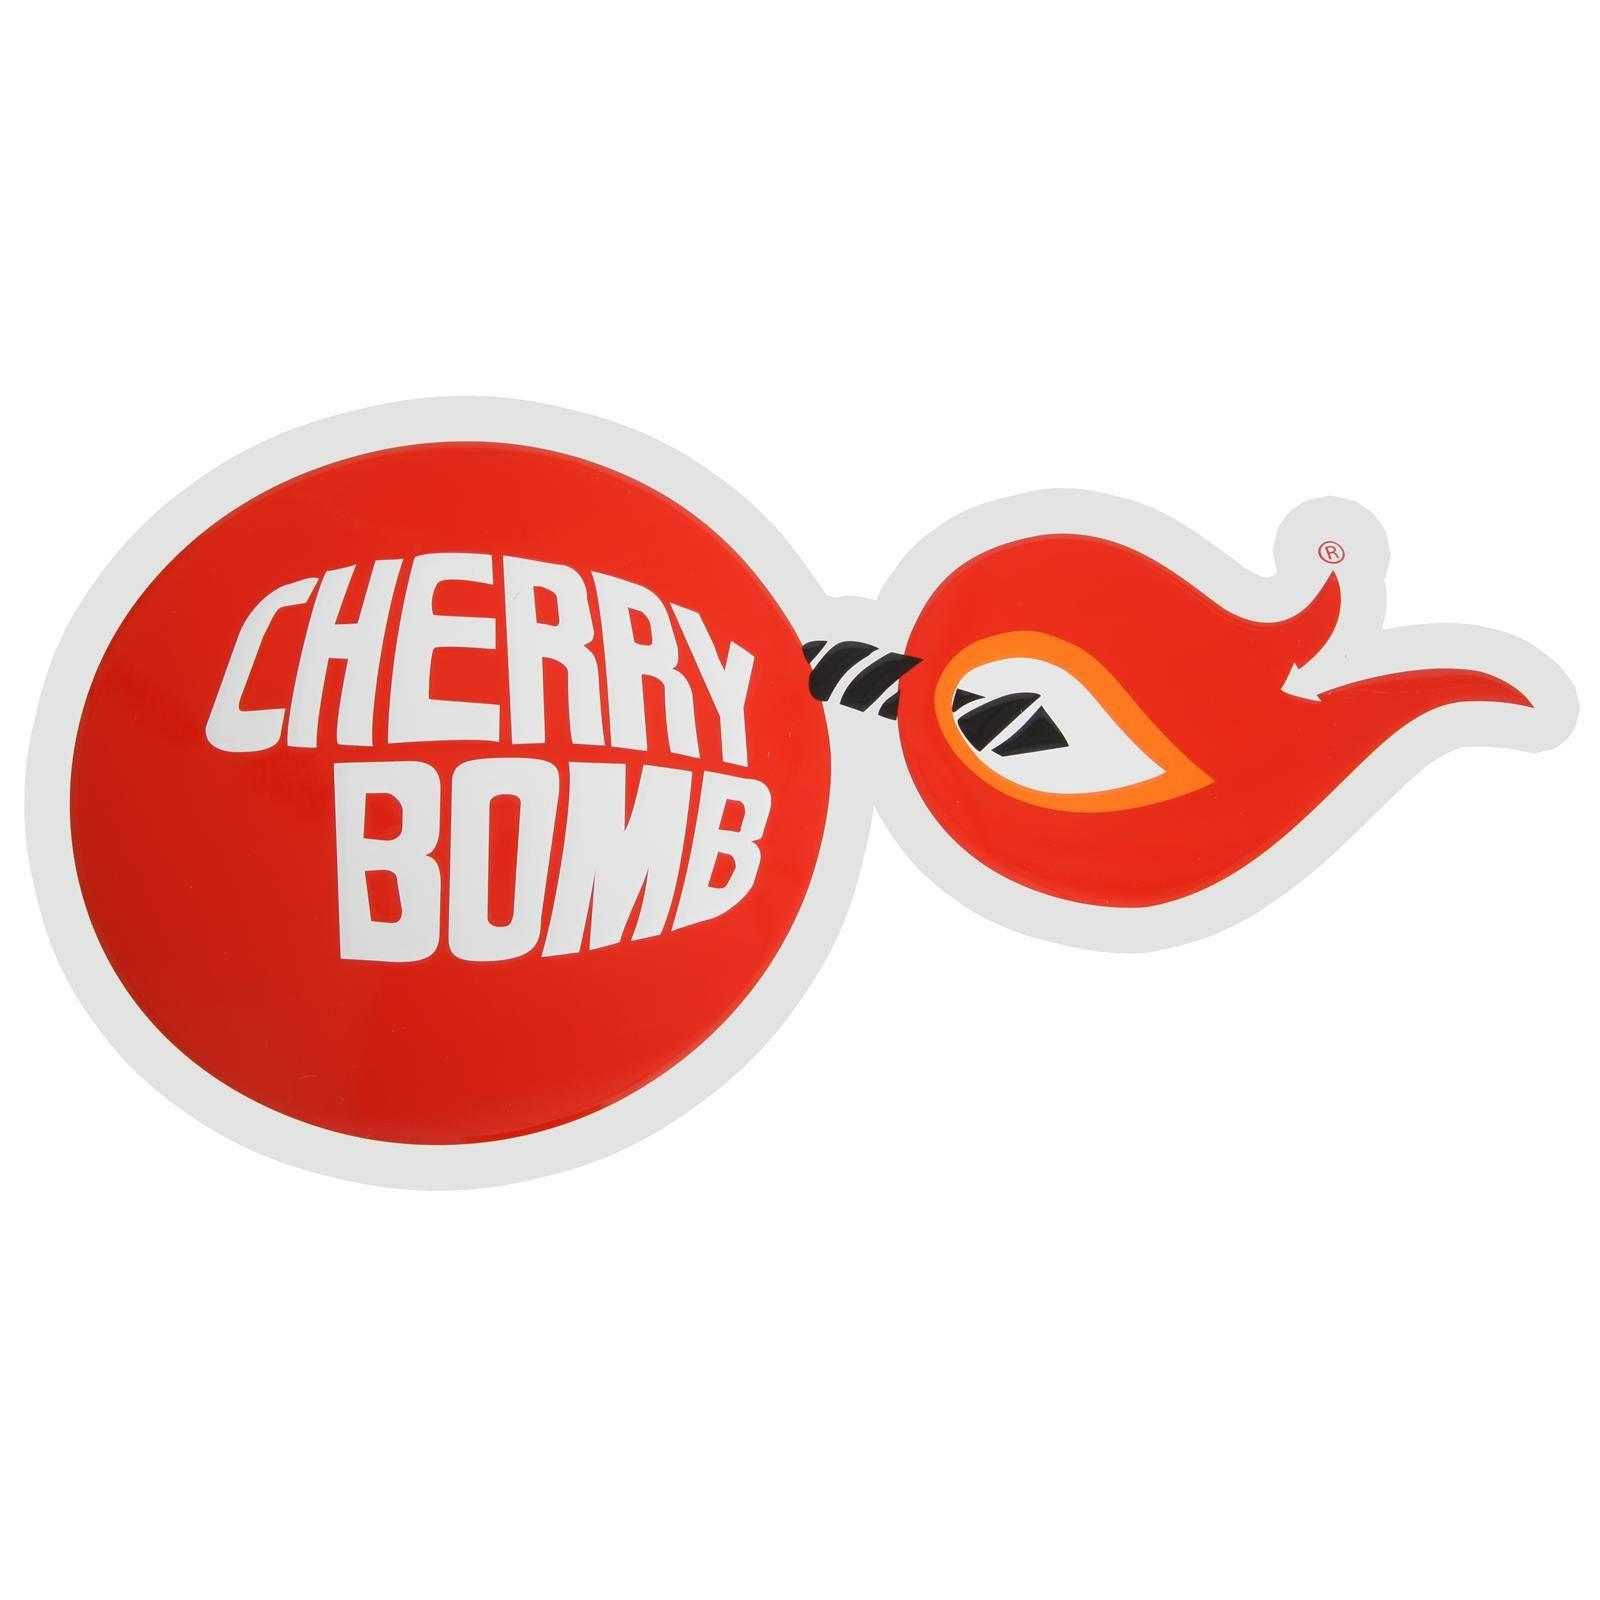 Cherry Bomb Logo - Cherry Bomb Tin Garage Signs NS9800 Shipping on Orders Over